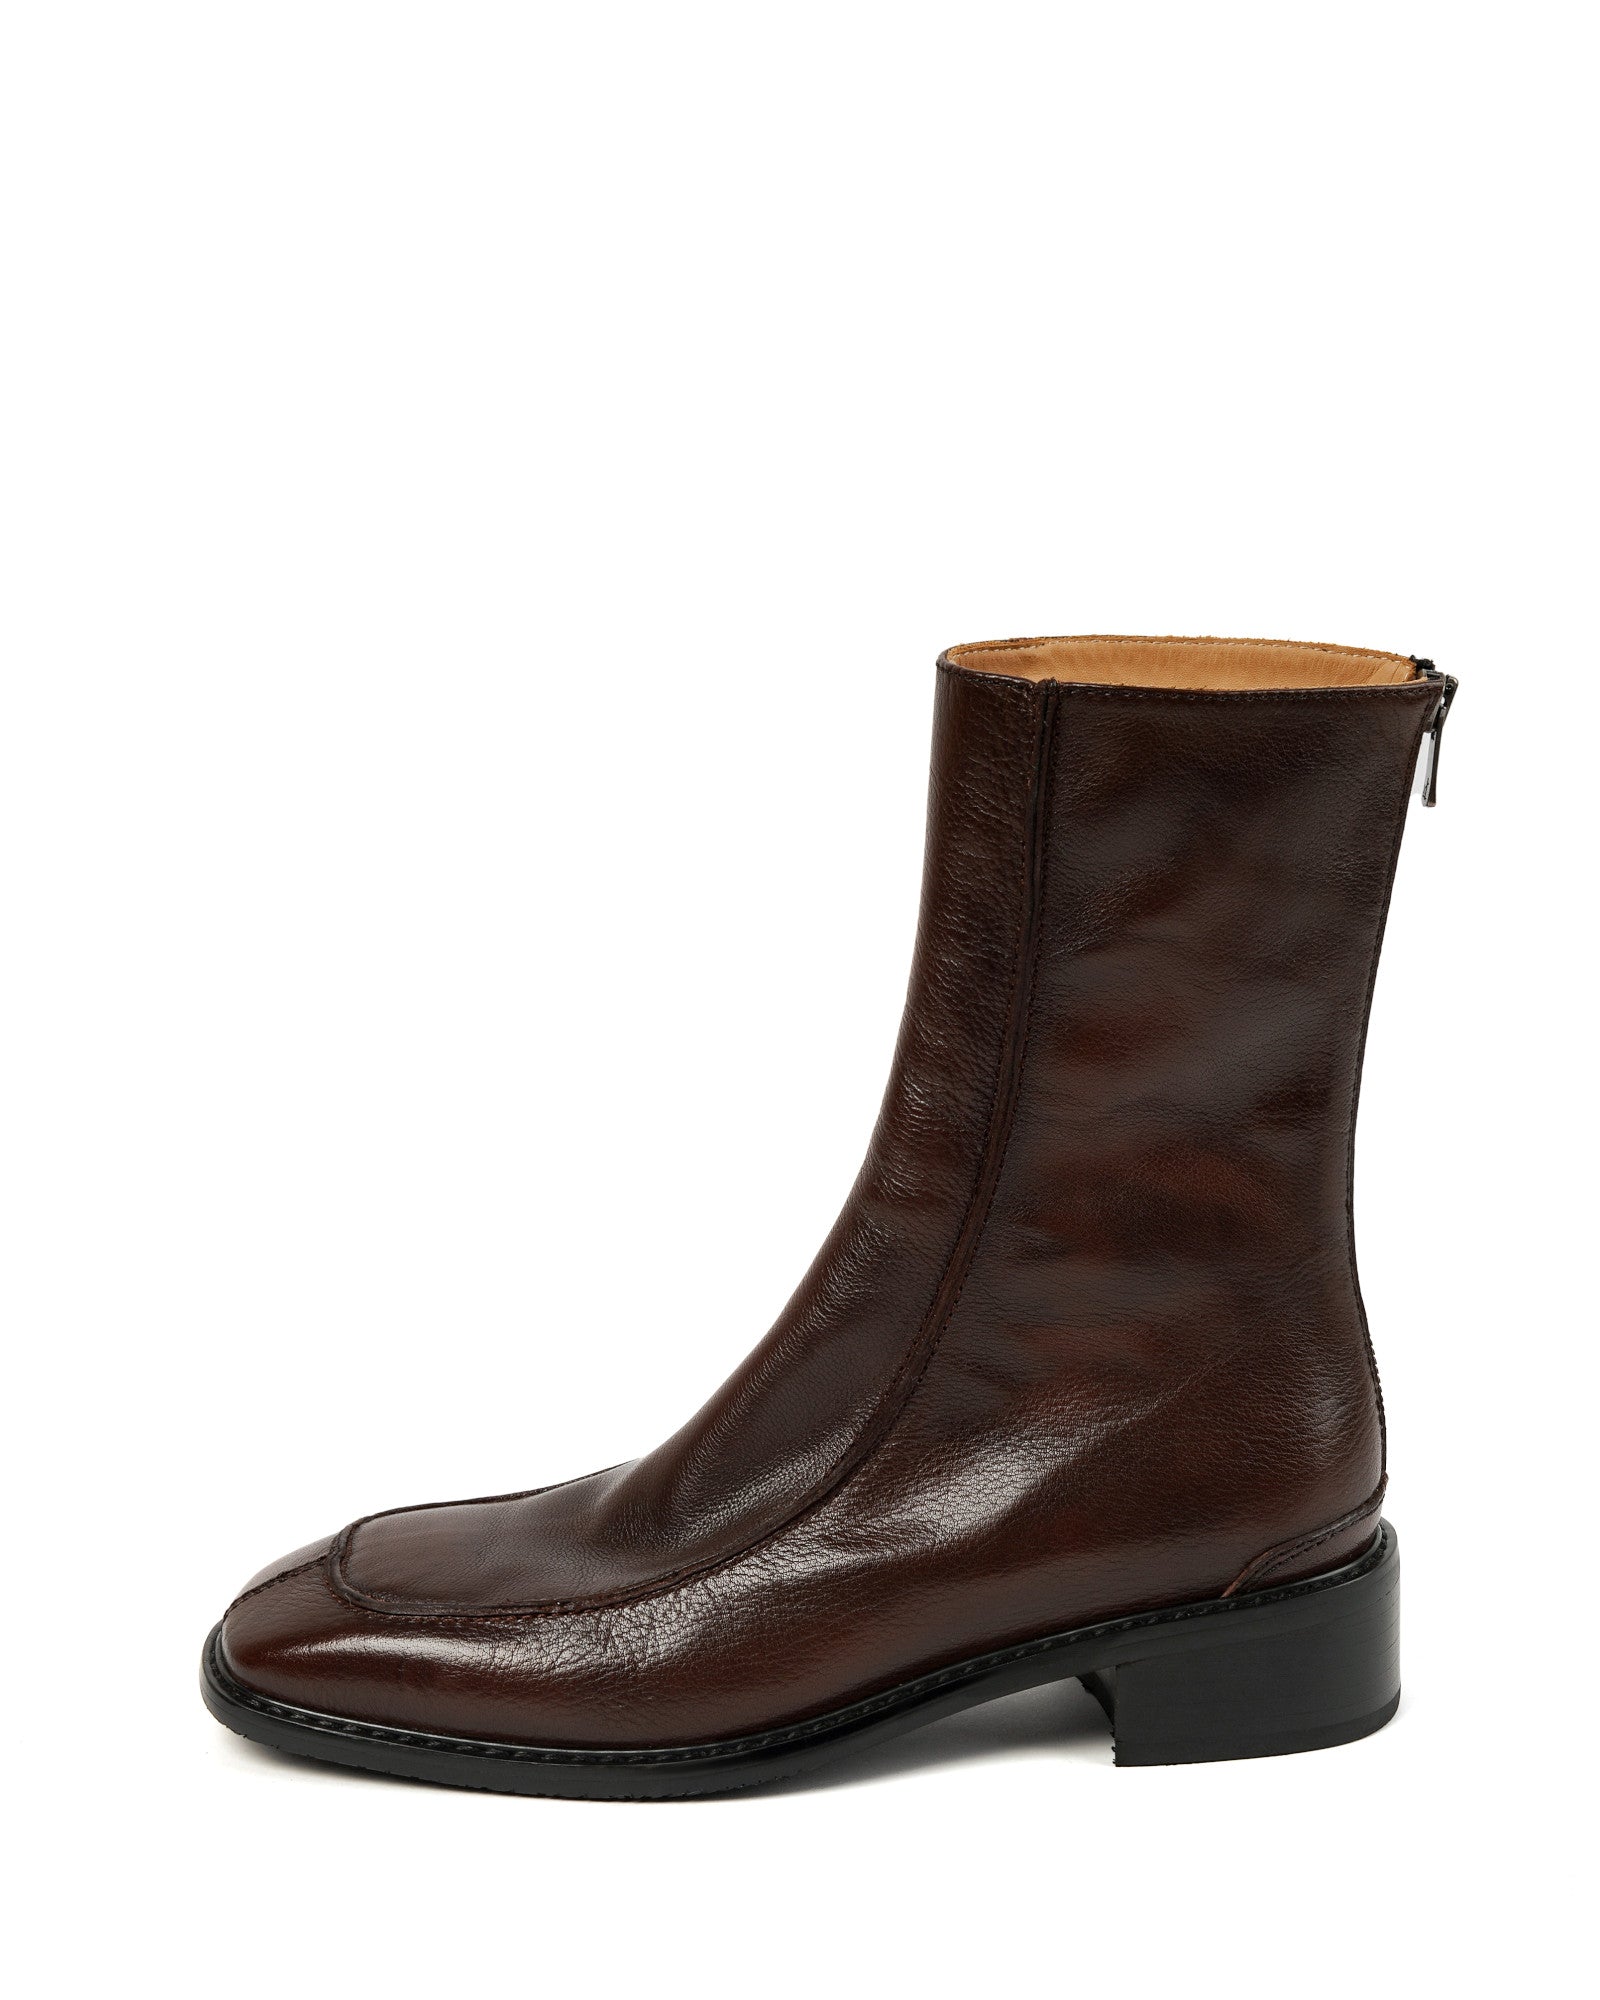 302-square-toe-mid-calf-leather-boots-brown-1